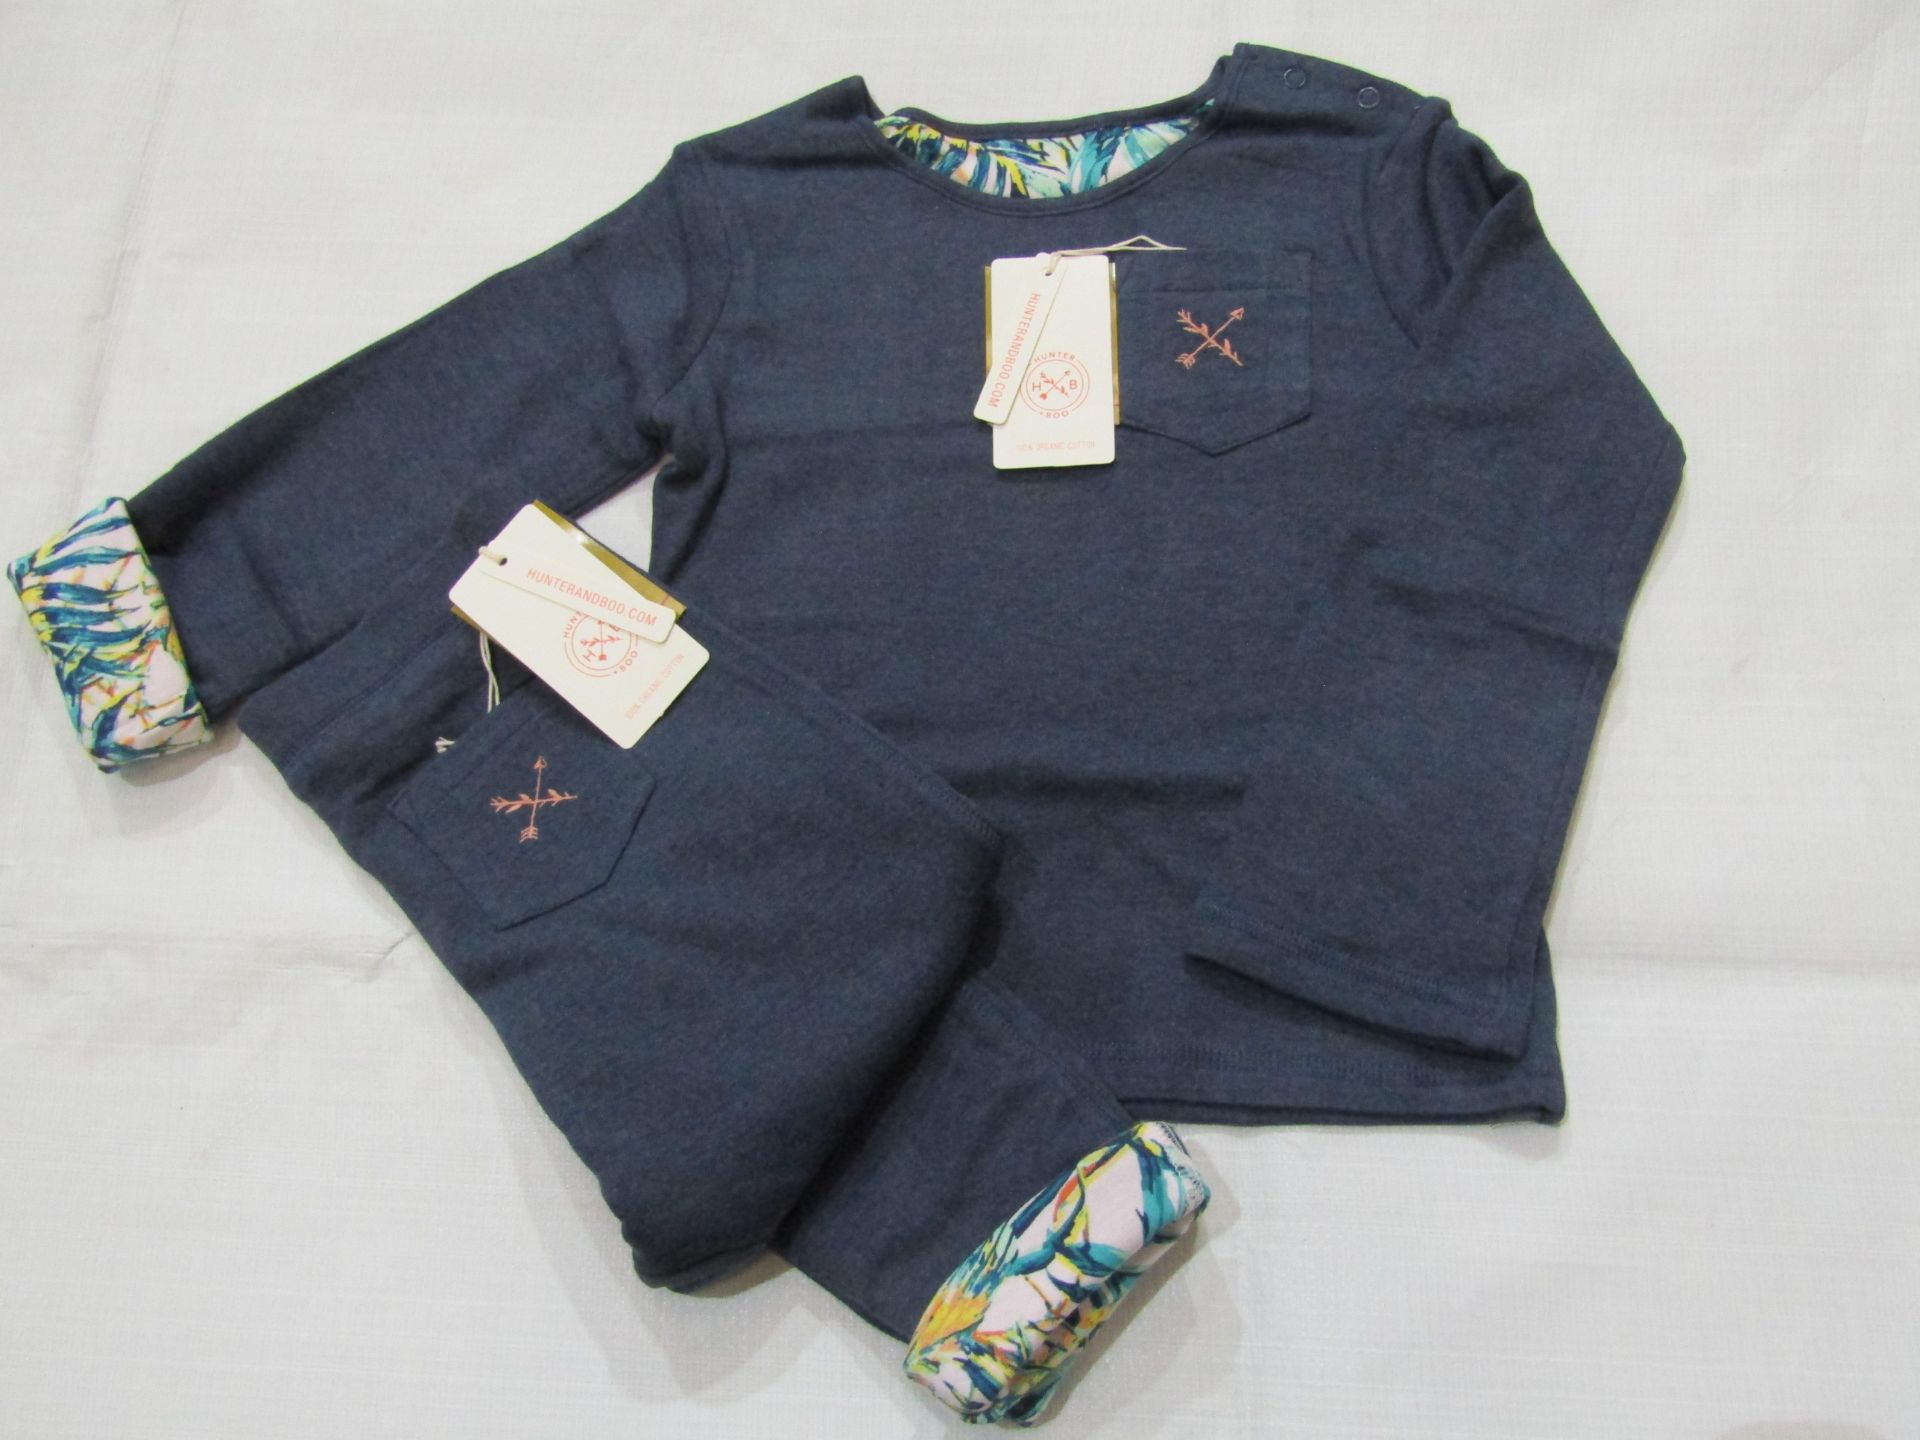 Hunter & Boo Reversible Sweater & Leggings Palawan/Navy Aged 3-4 yrs New & Packaged RRP Sweater £